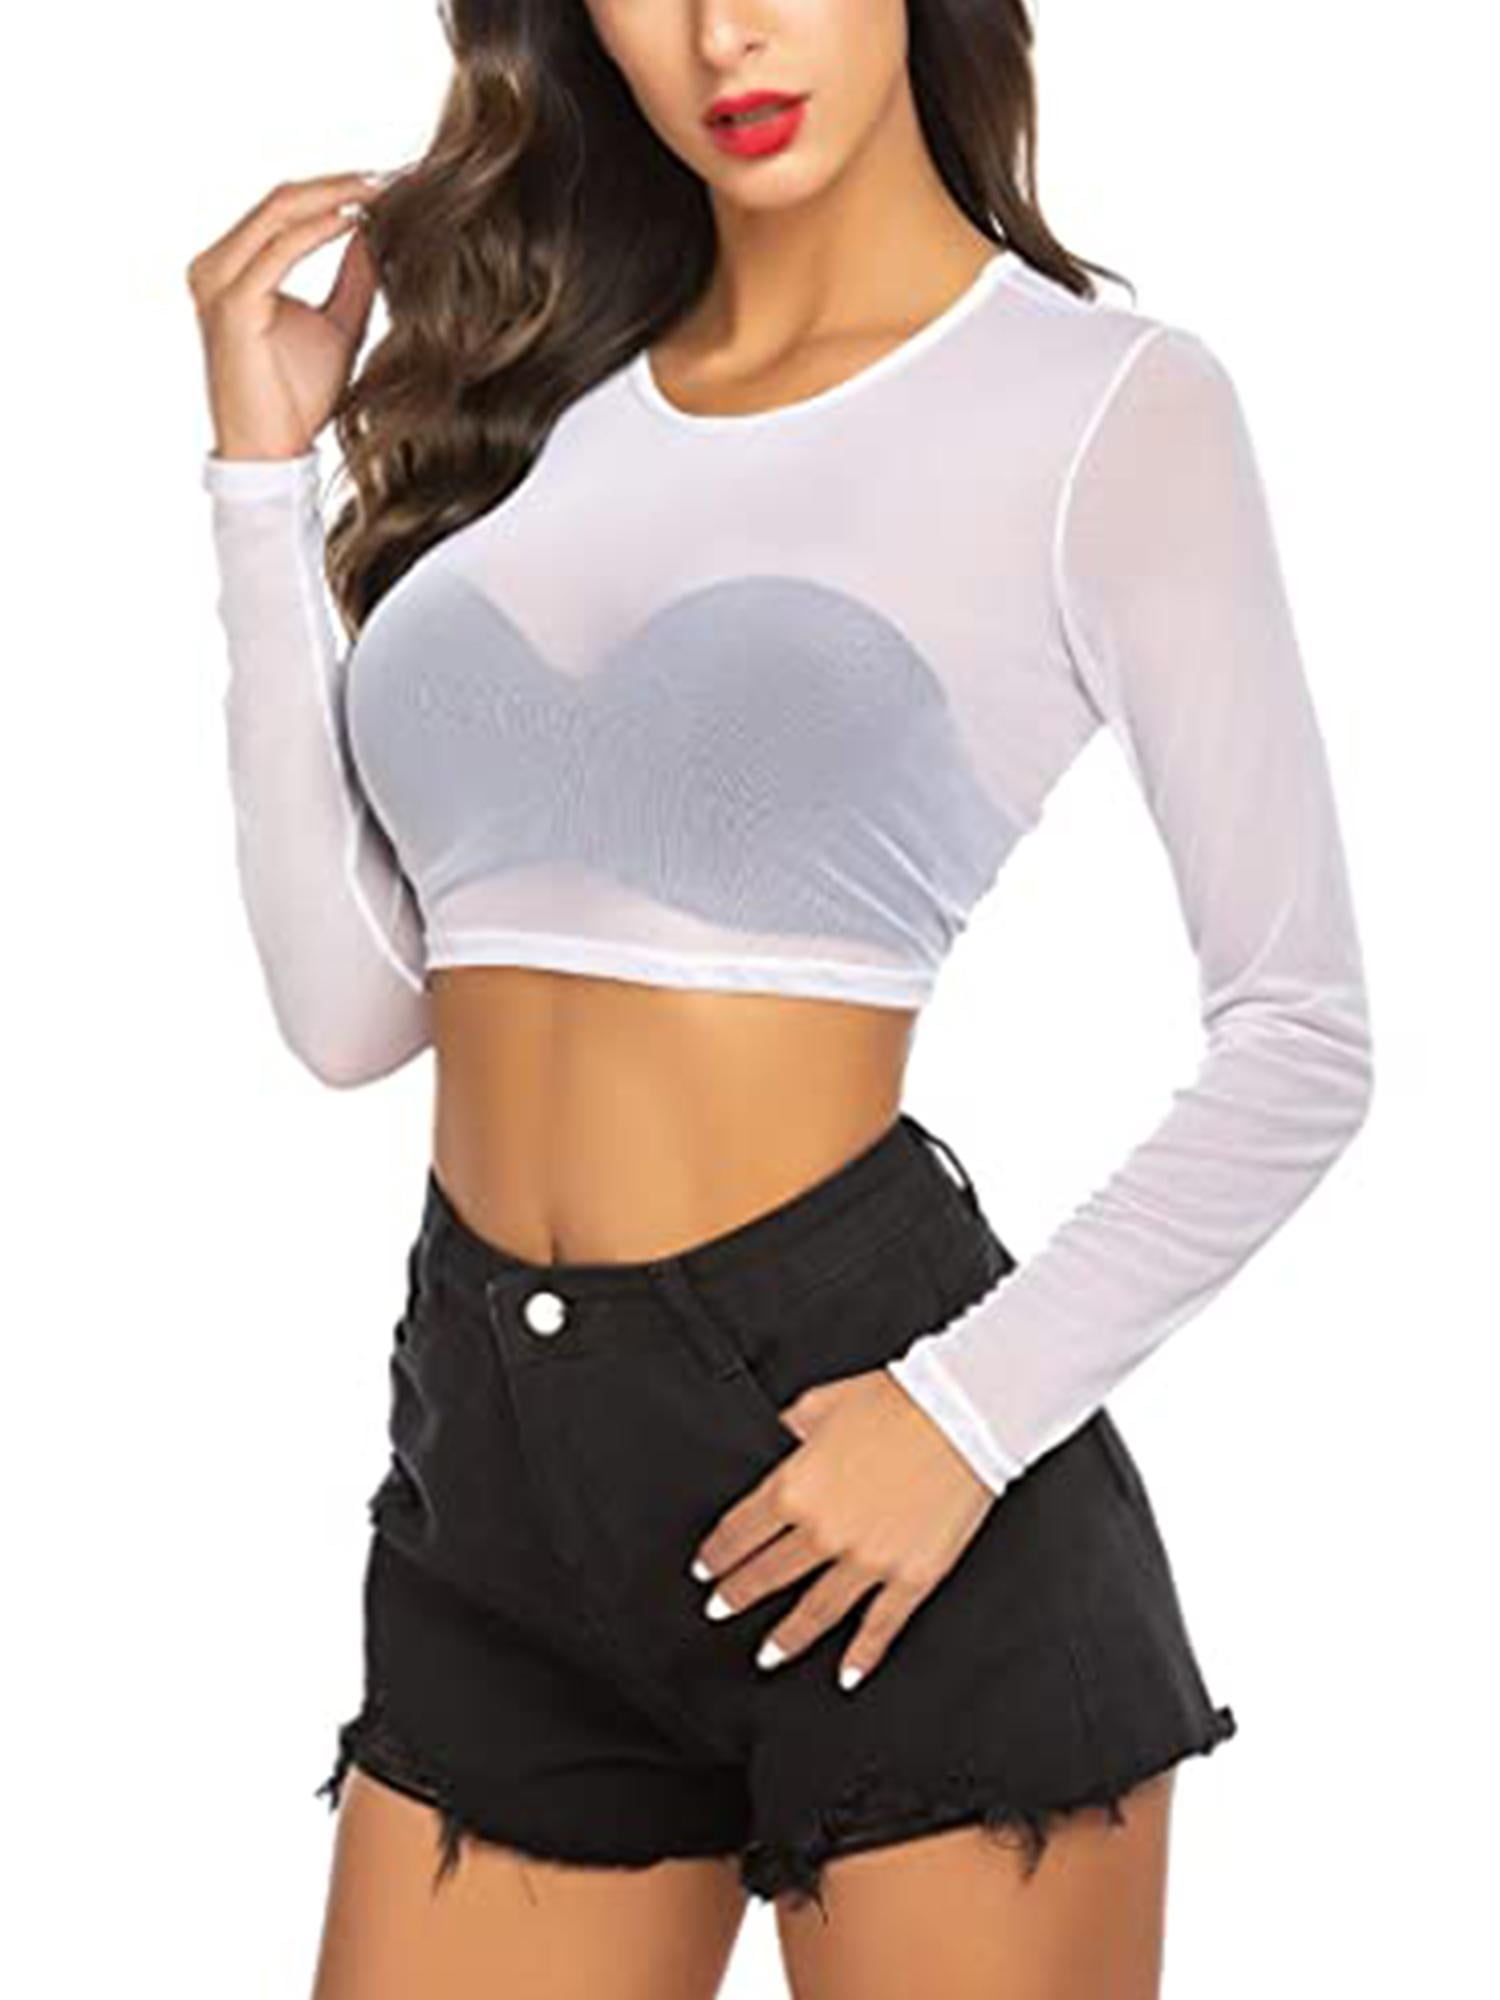 cindy martin del campo recommends women in see thru tops pic